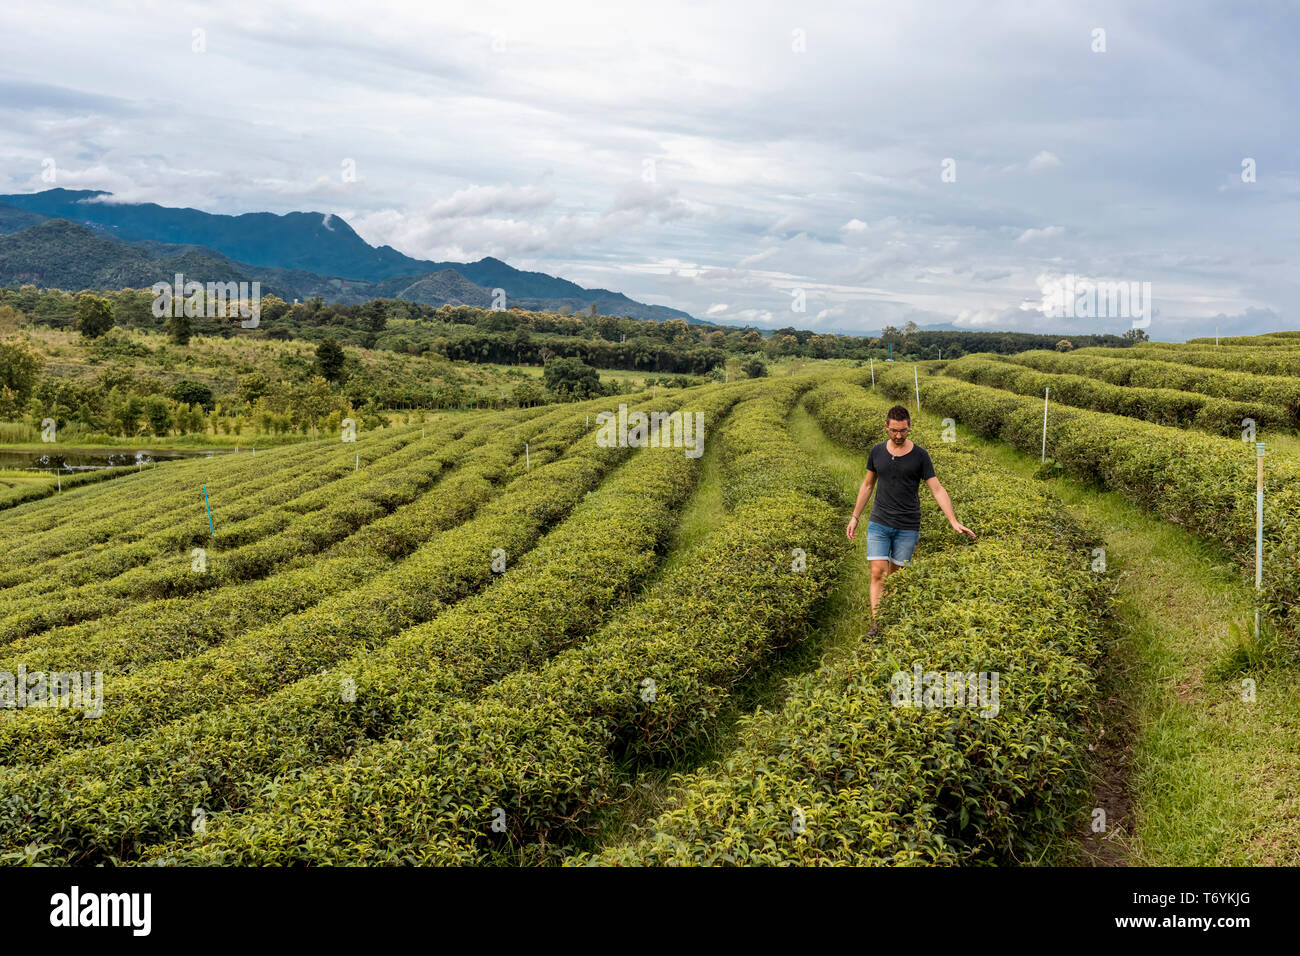 Man looking the view of a tea crops in a farm In Chiang Rai, Thailand. Stock Photo